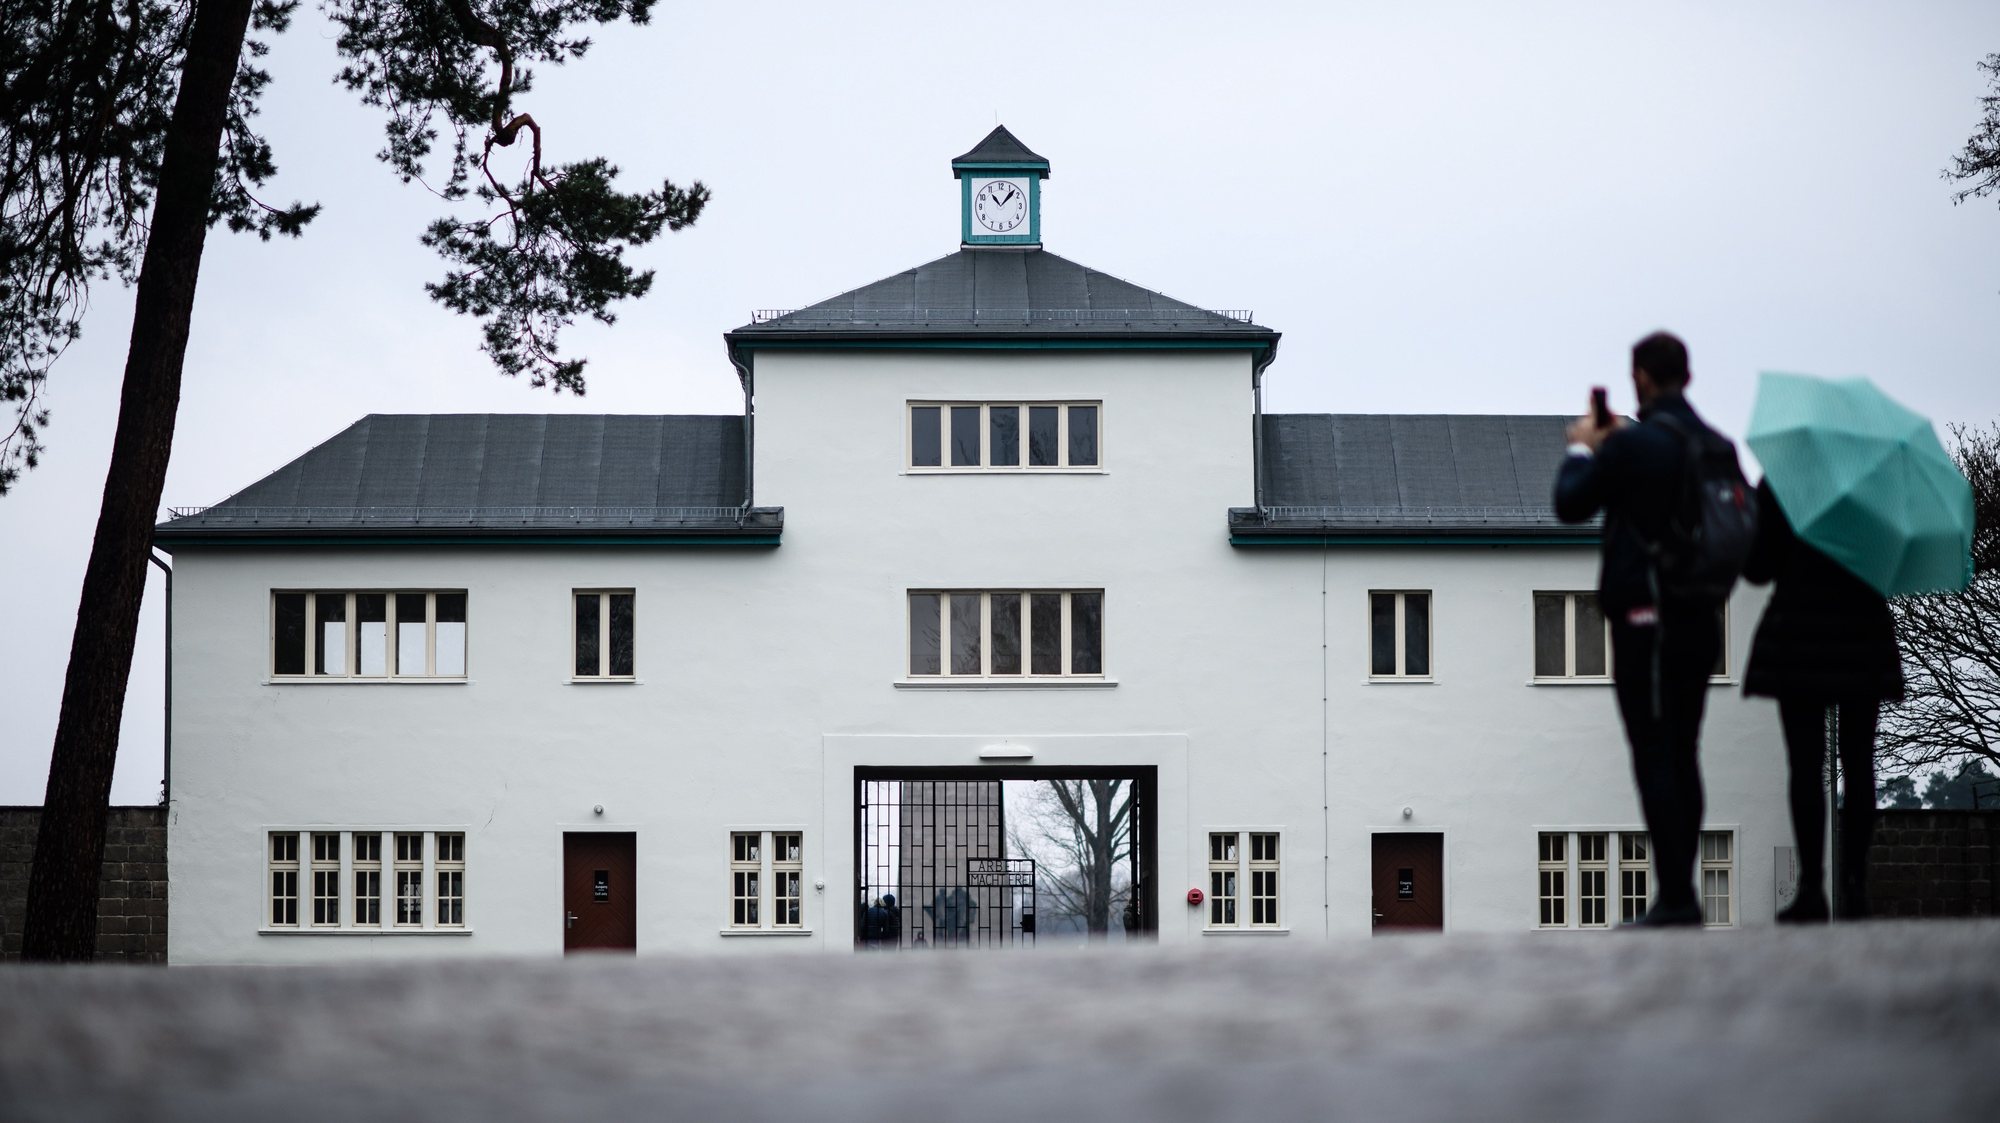 epa07505917 Visitors take a photo in front of the former entrance with the reading &#039;Arbeit macht frei&#039; (work sets you free) at the former concentration camp Sachsenhausen in Oranienburg near Berlin, Germany, 14 April 2019. Today Sachsenhausen commemorates the 74th day of its liberation from the Nazis.  EPA/CLEMENS BILAN